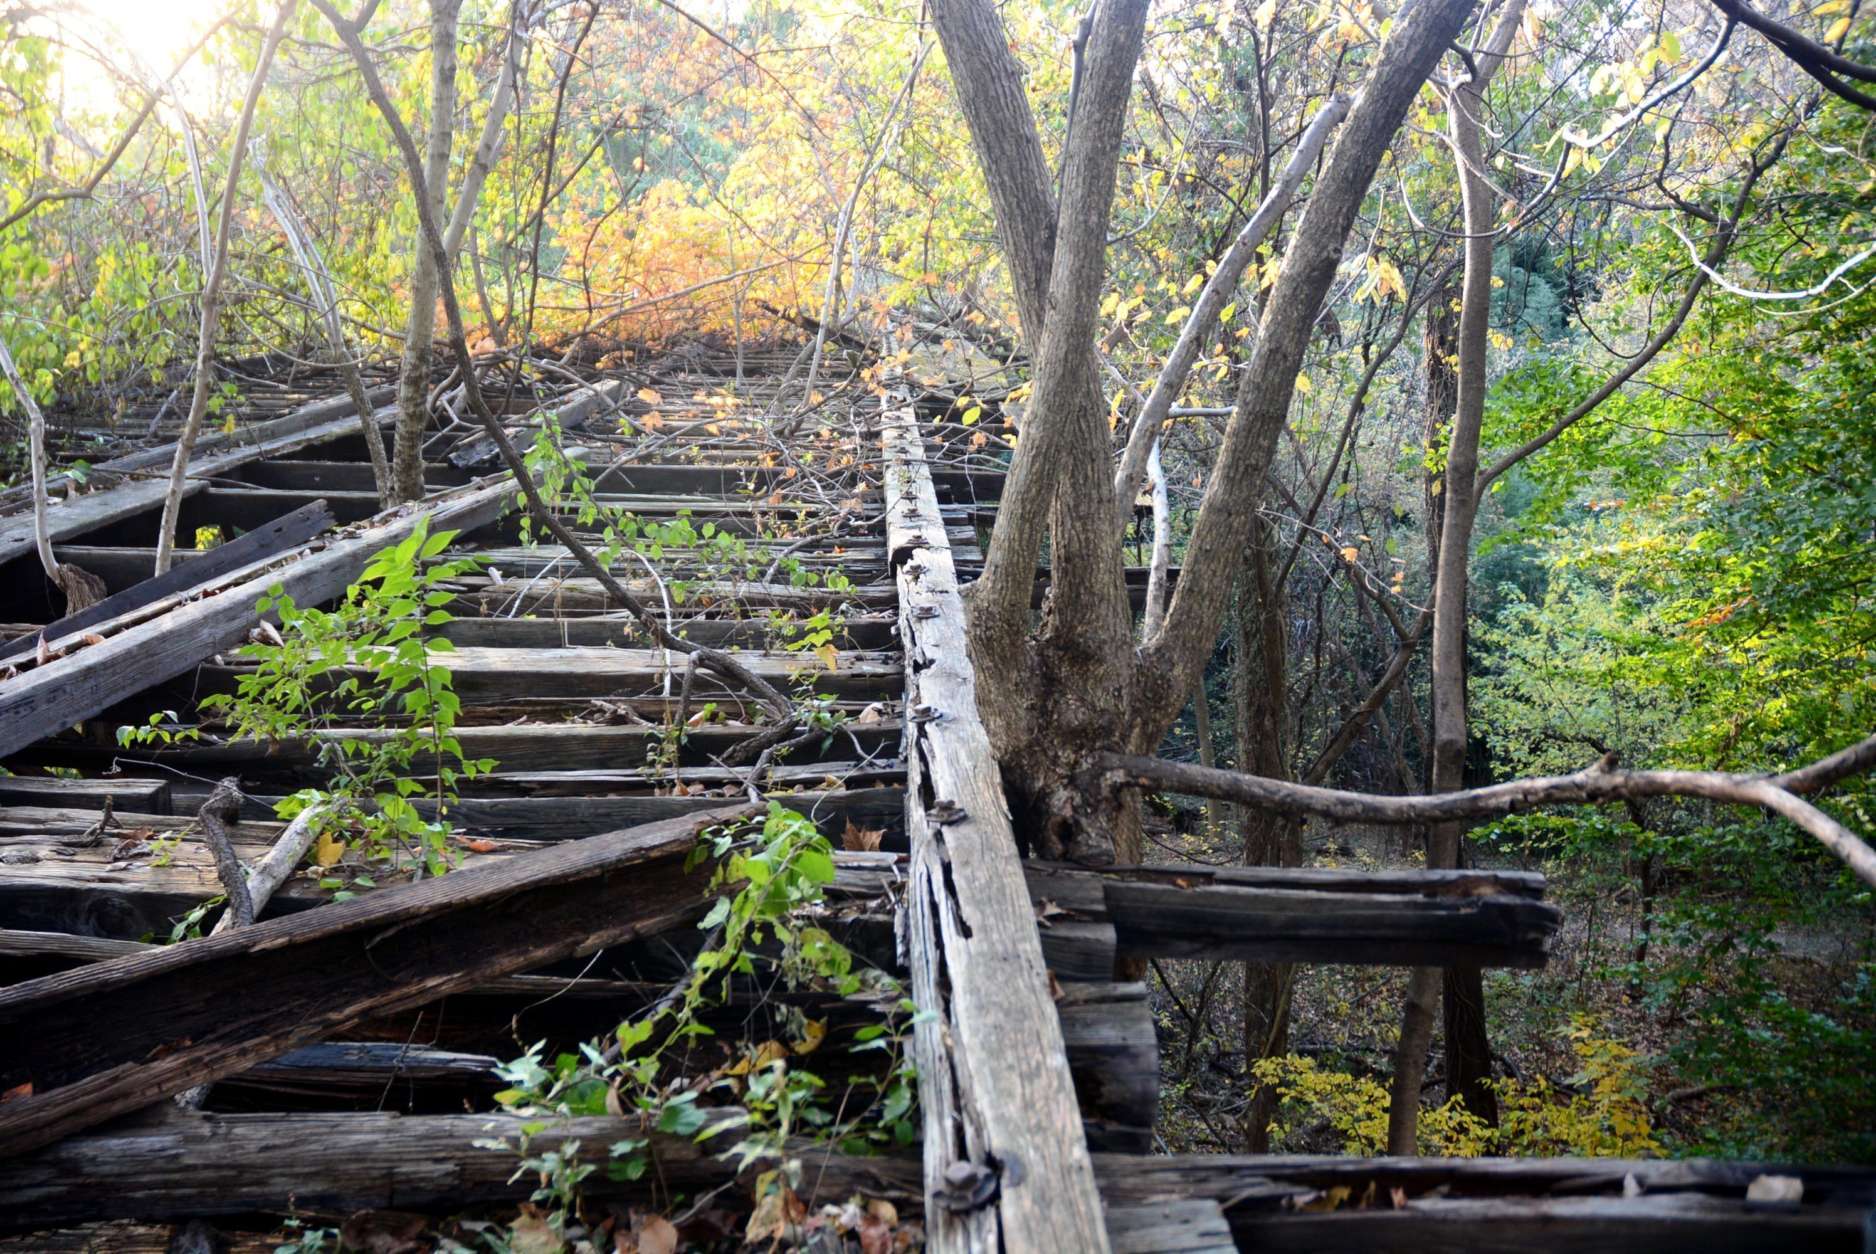 The Foundry Branch Trolley Trestle runs over Glover-Archbold Park in Northwest, near Georgetown University. (WTOP/Dave Dildine)